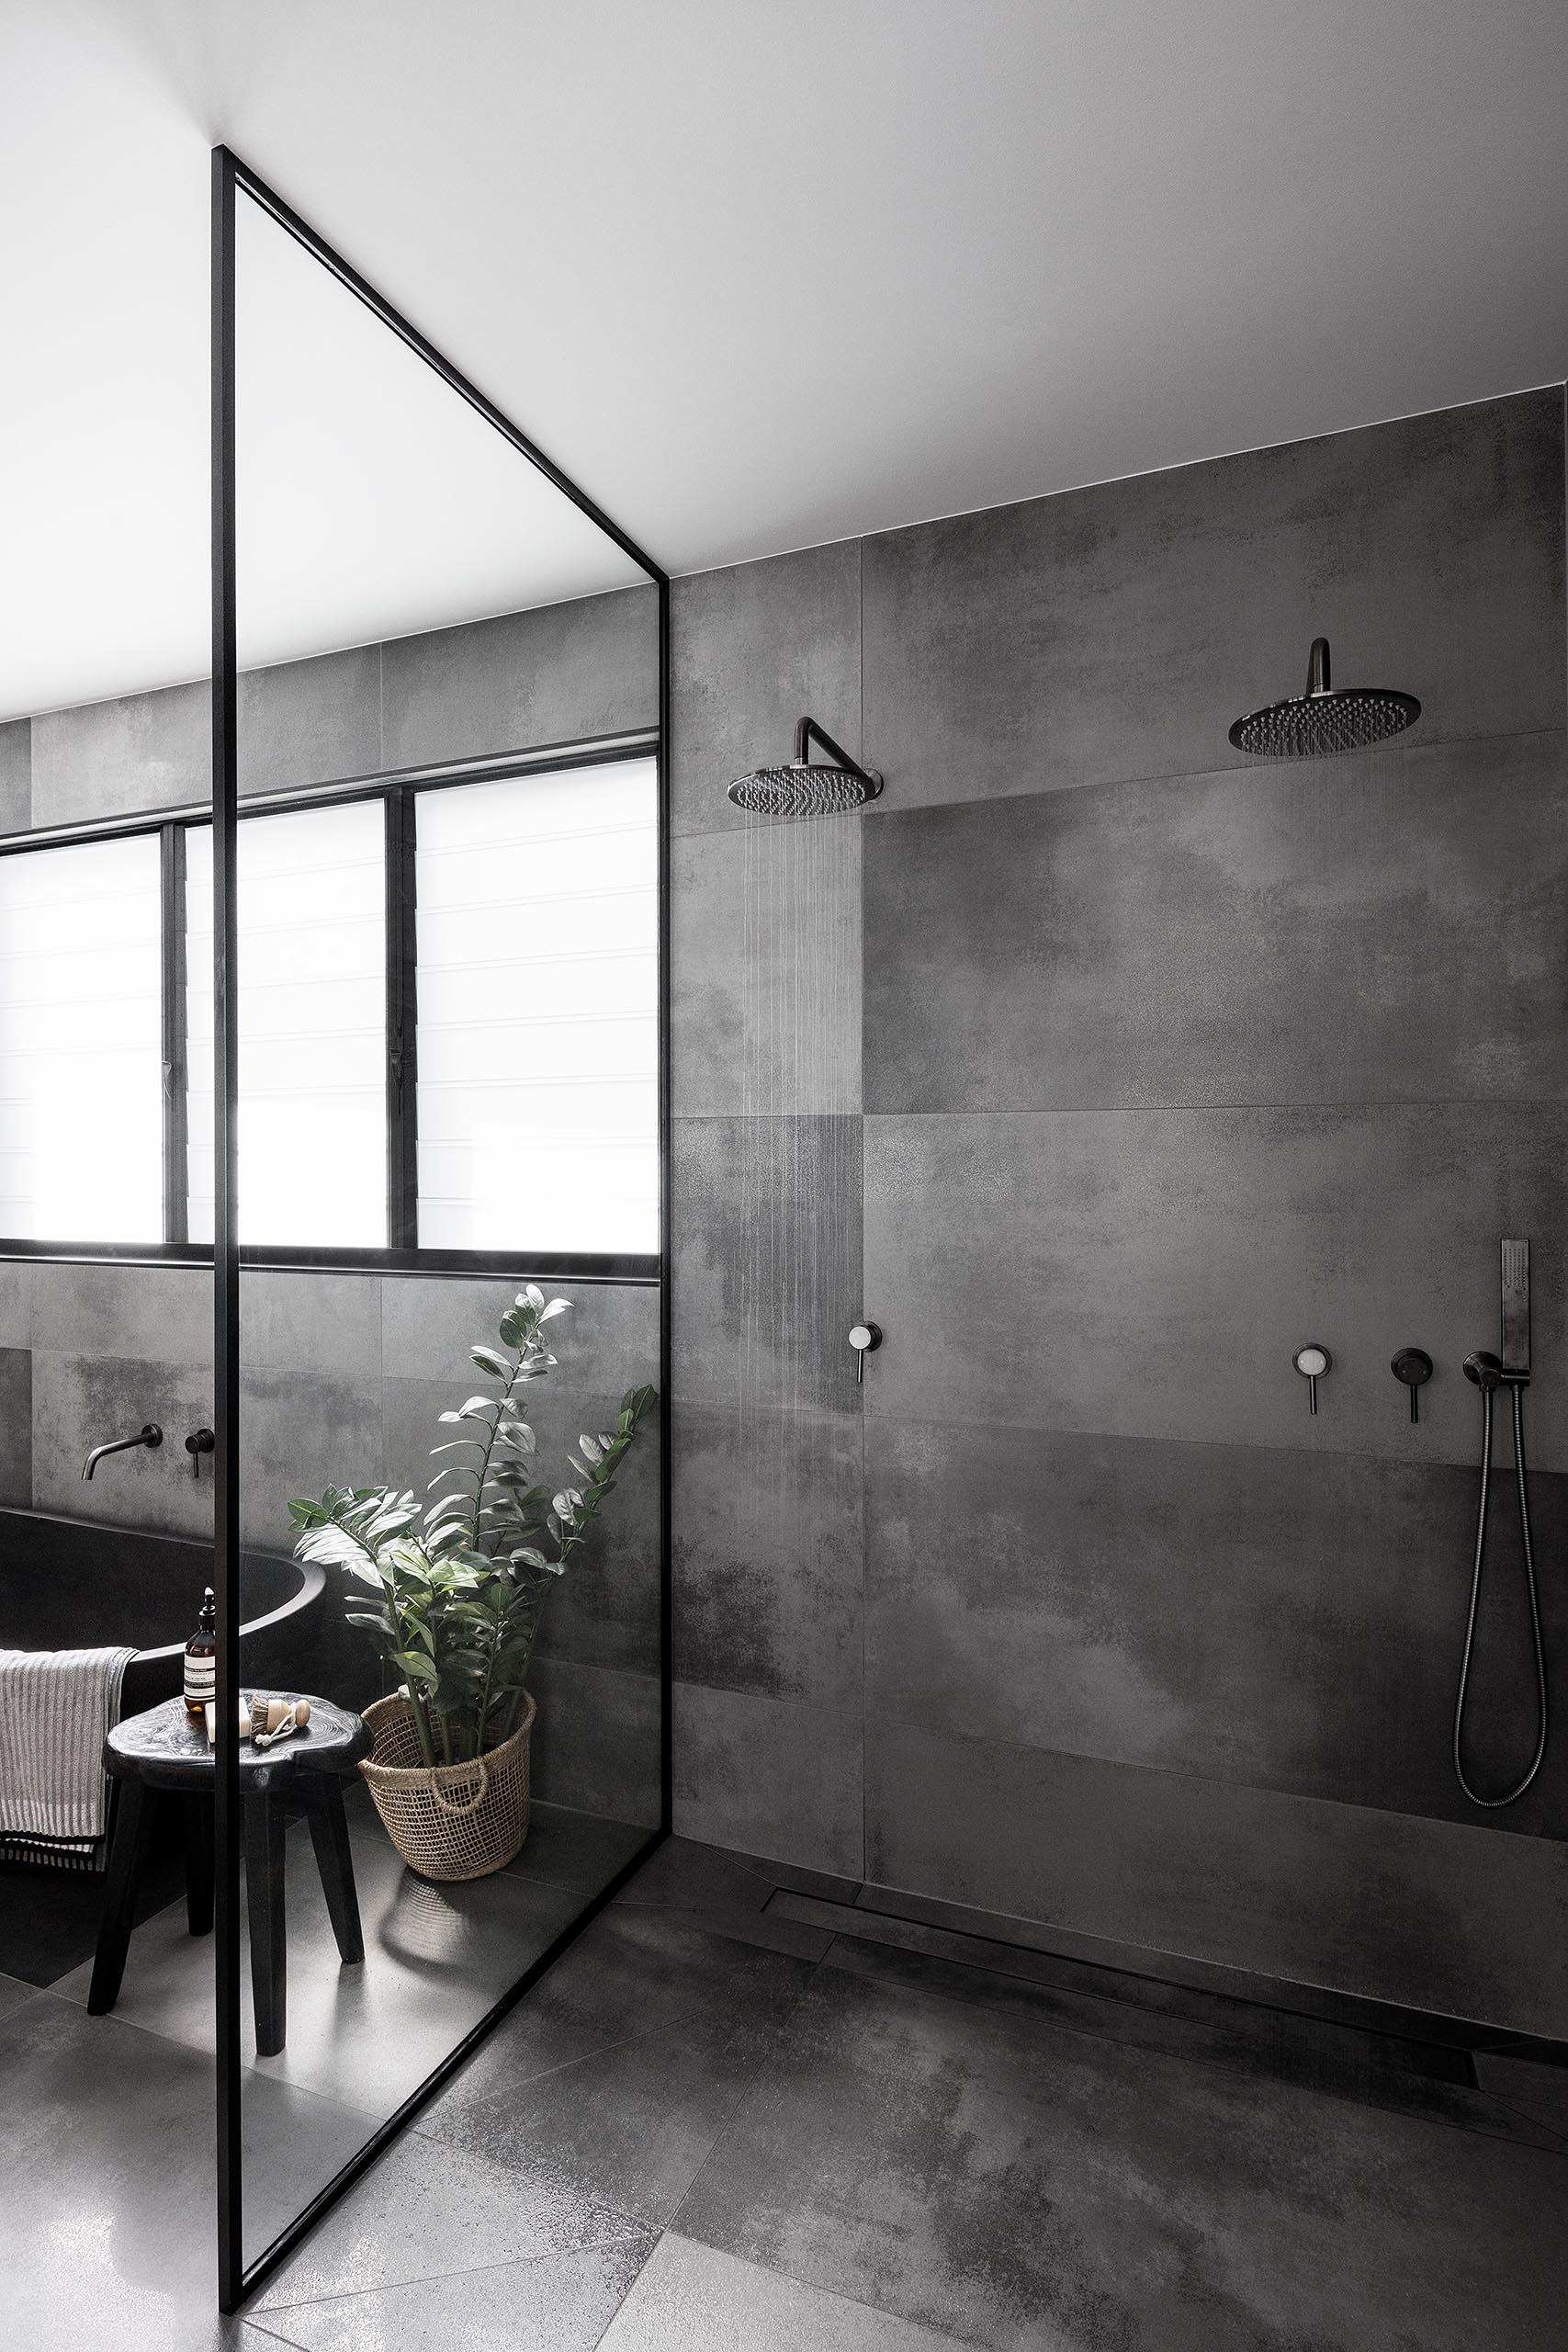 A modern bathroom with a black framed glass shower screen, large format grey tiles, and two shower heads.